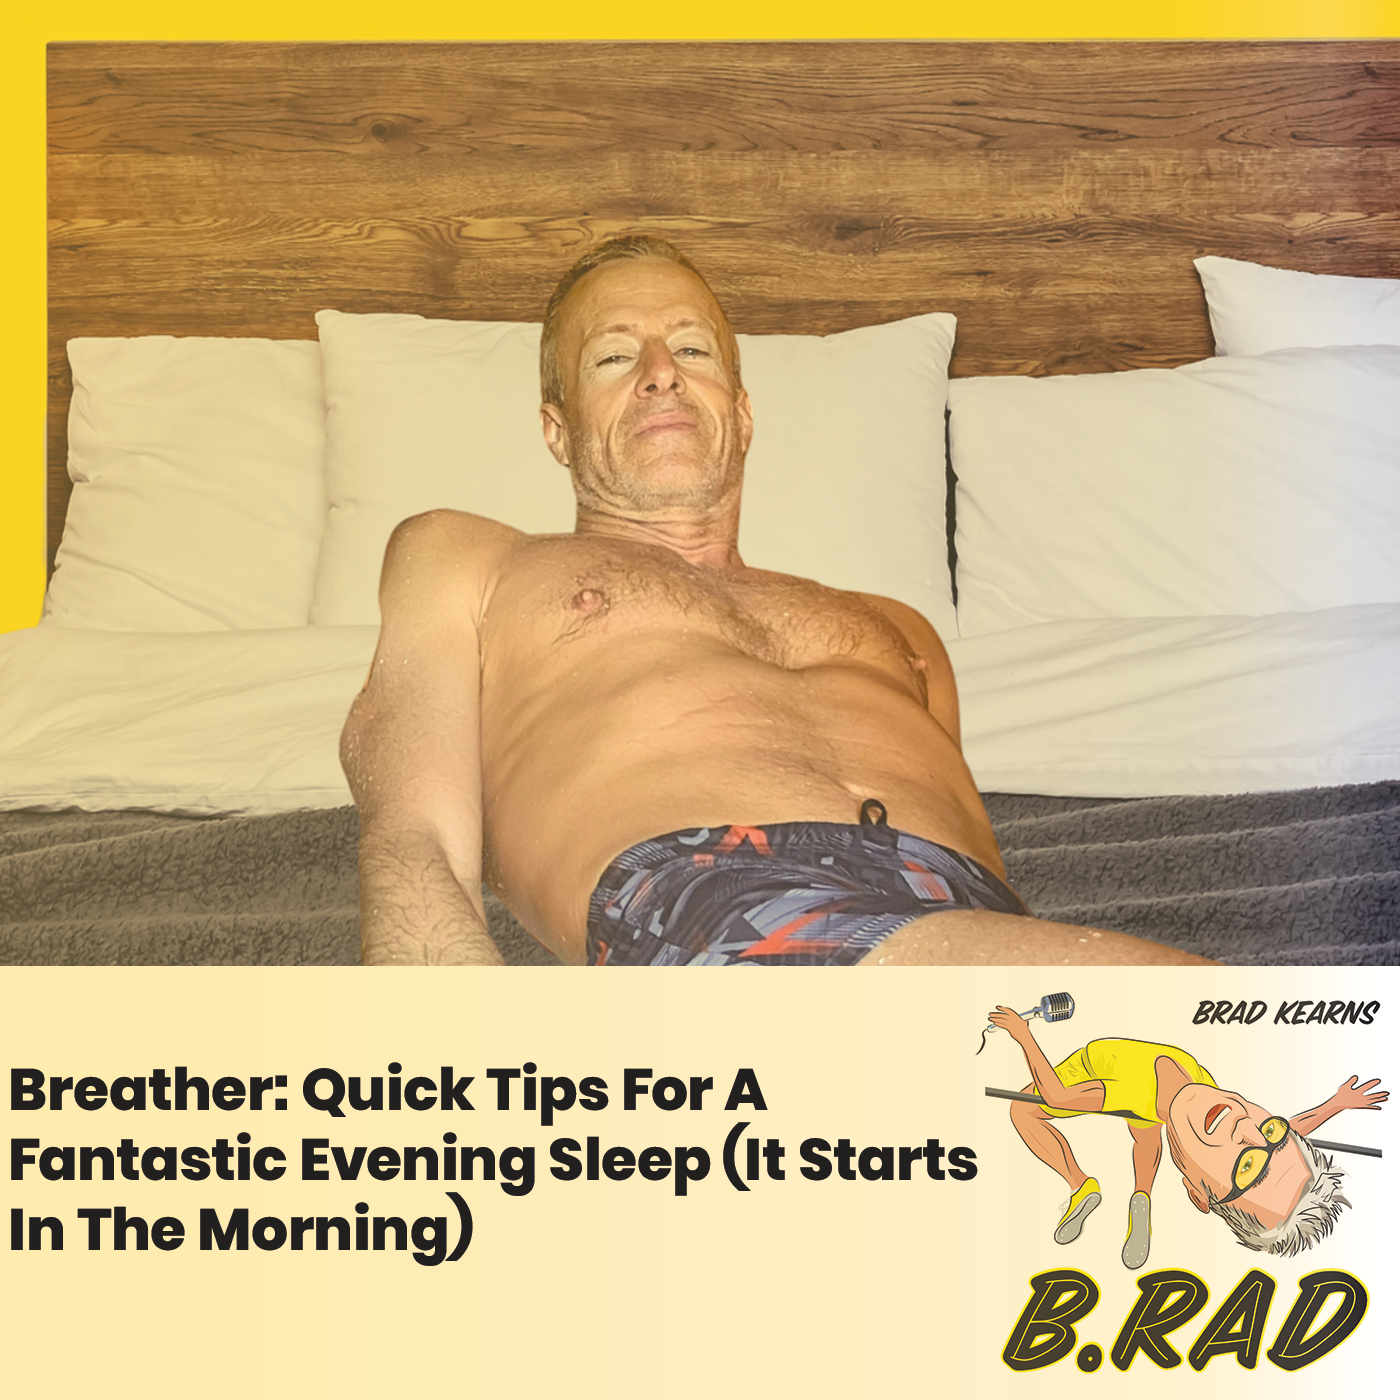 Breather: Quick Tips For A Fantastic Evening Sleep (It Starts In The Morning)